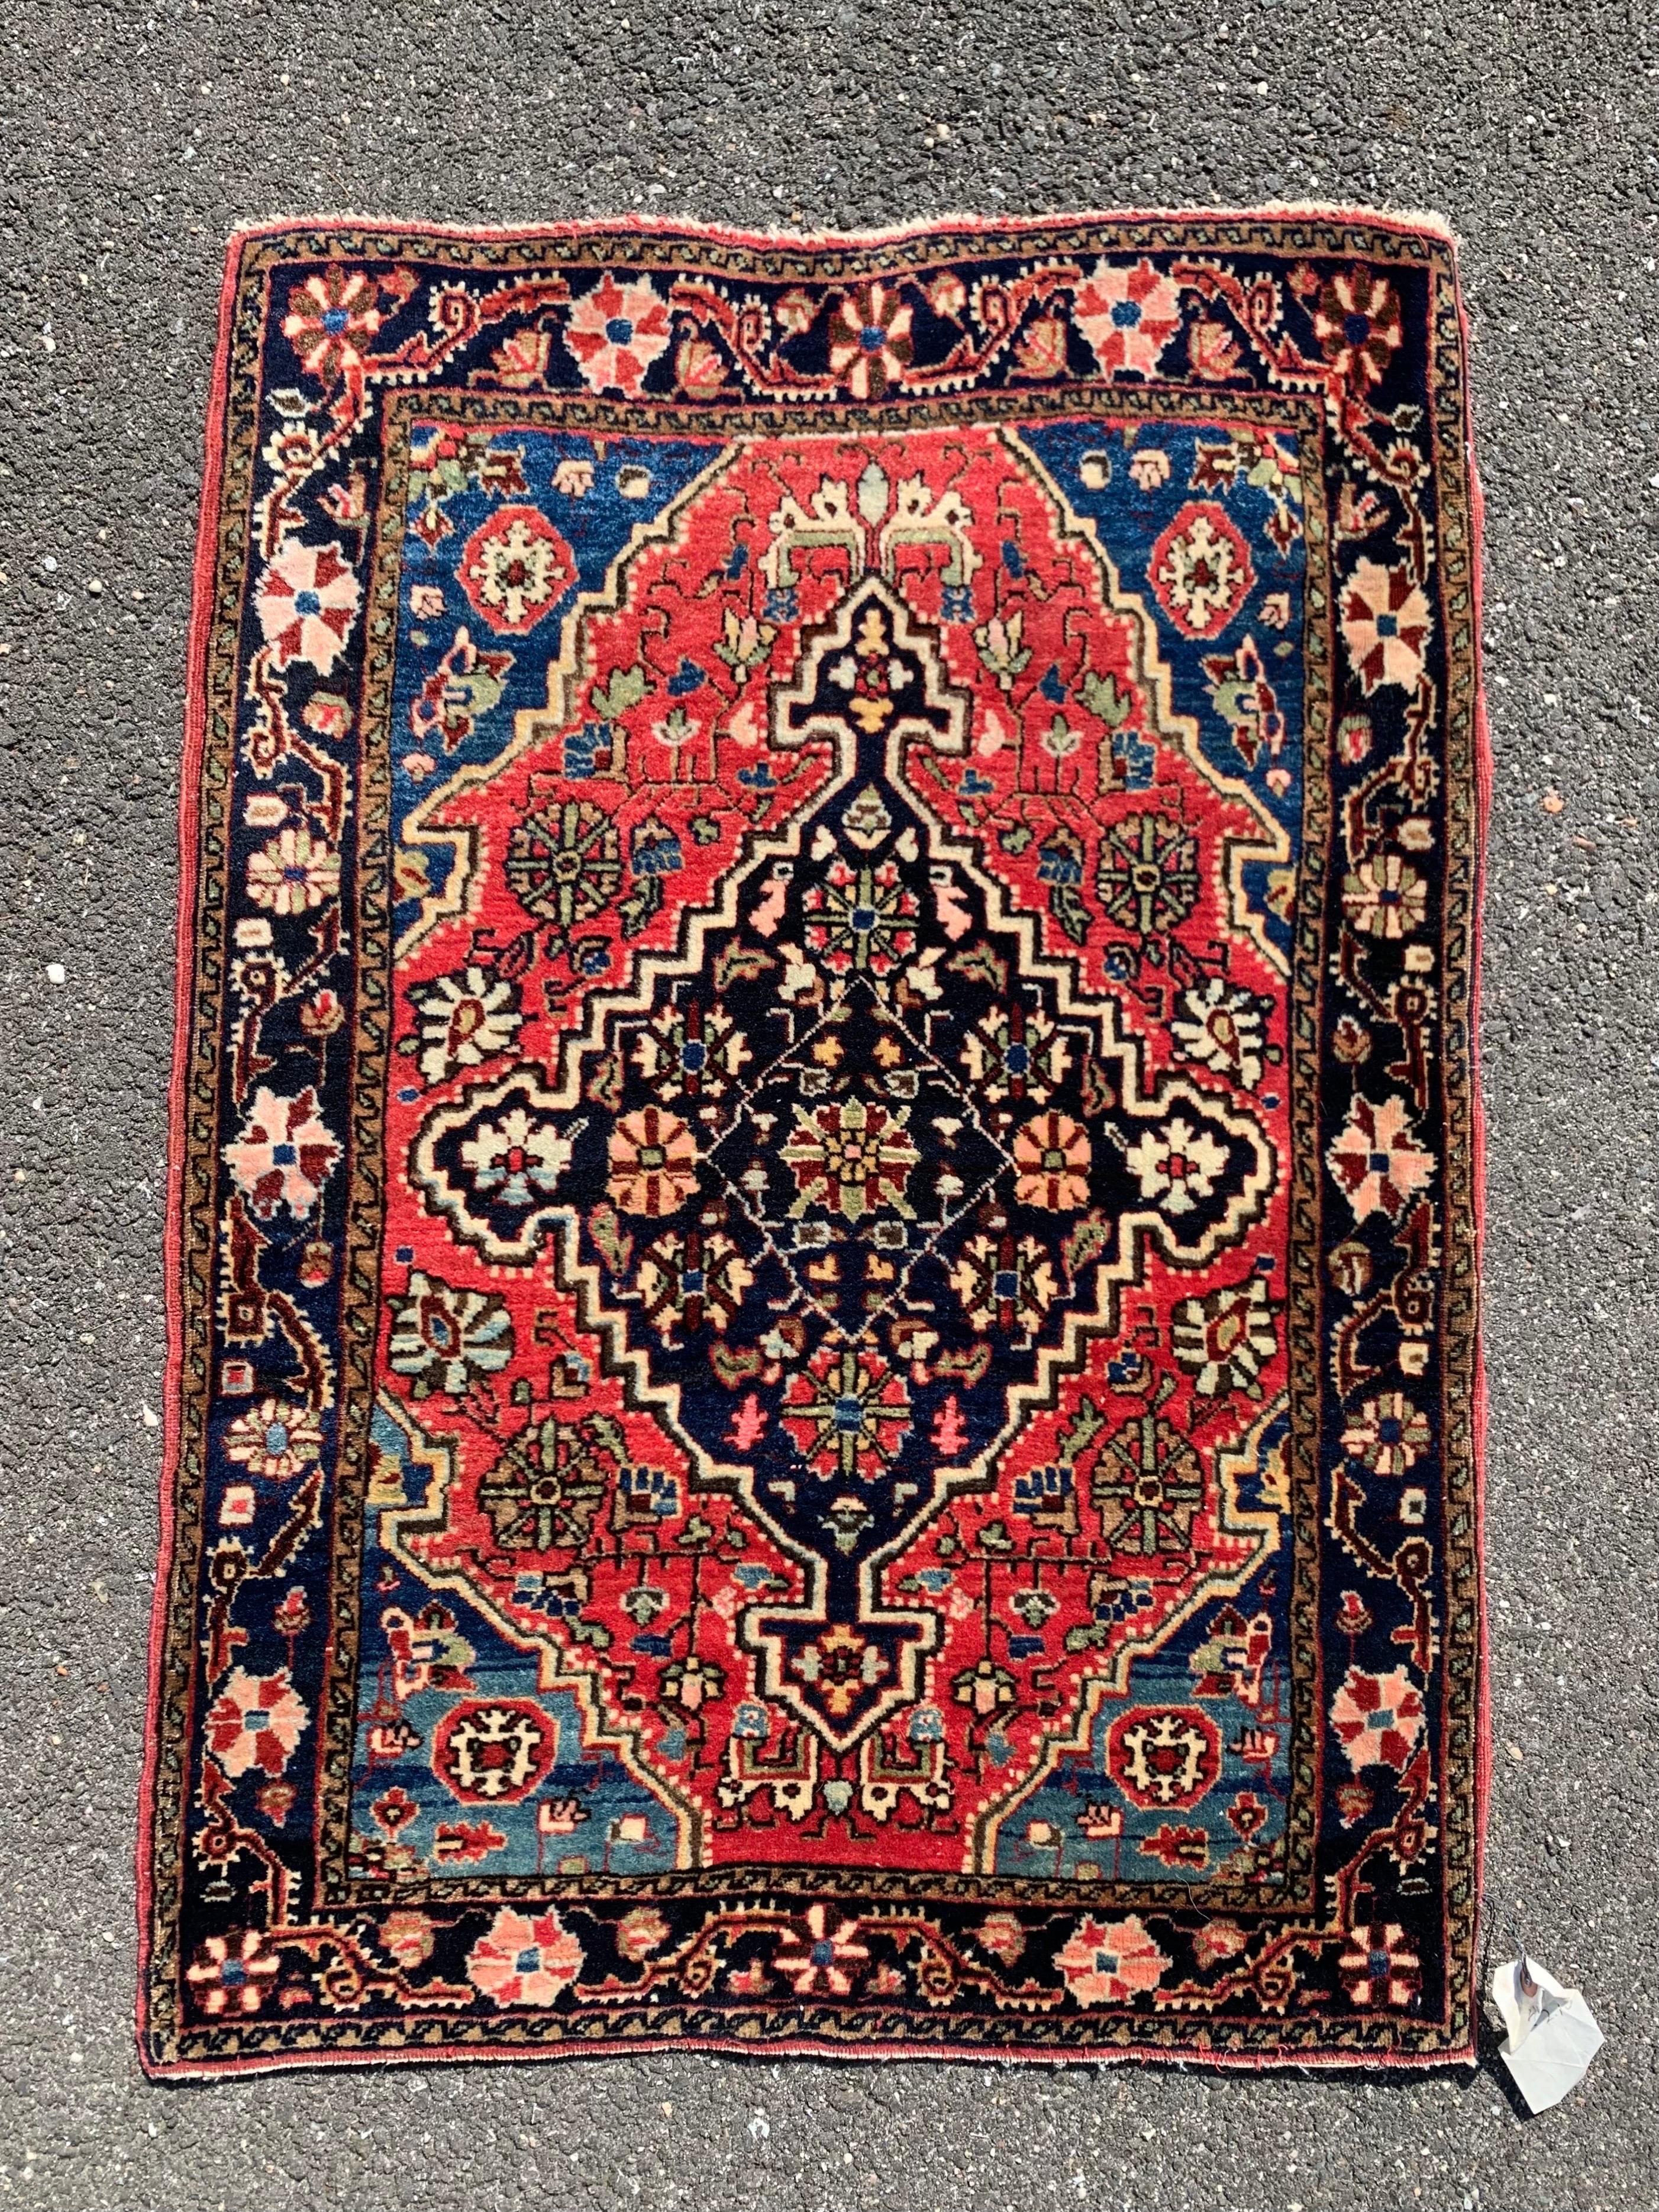 Pristine antique Farahan Sarouk dating from the 1930s measuring 2.2 x 2.6 ft.

Persian Farahan Sarouk rugs were woven in the village of Sarouk but these carpets given the name “Farahan” as a distinction for their exceptional type of Sarouks. The